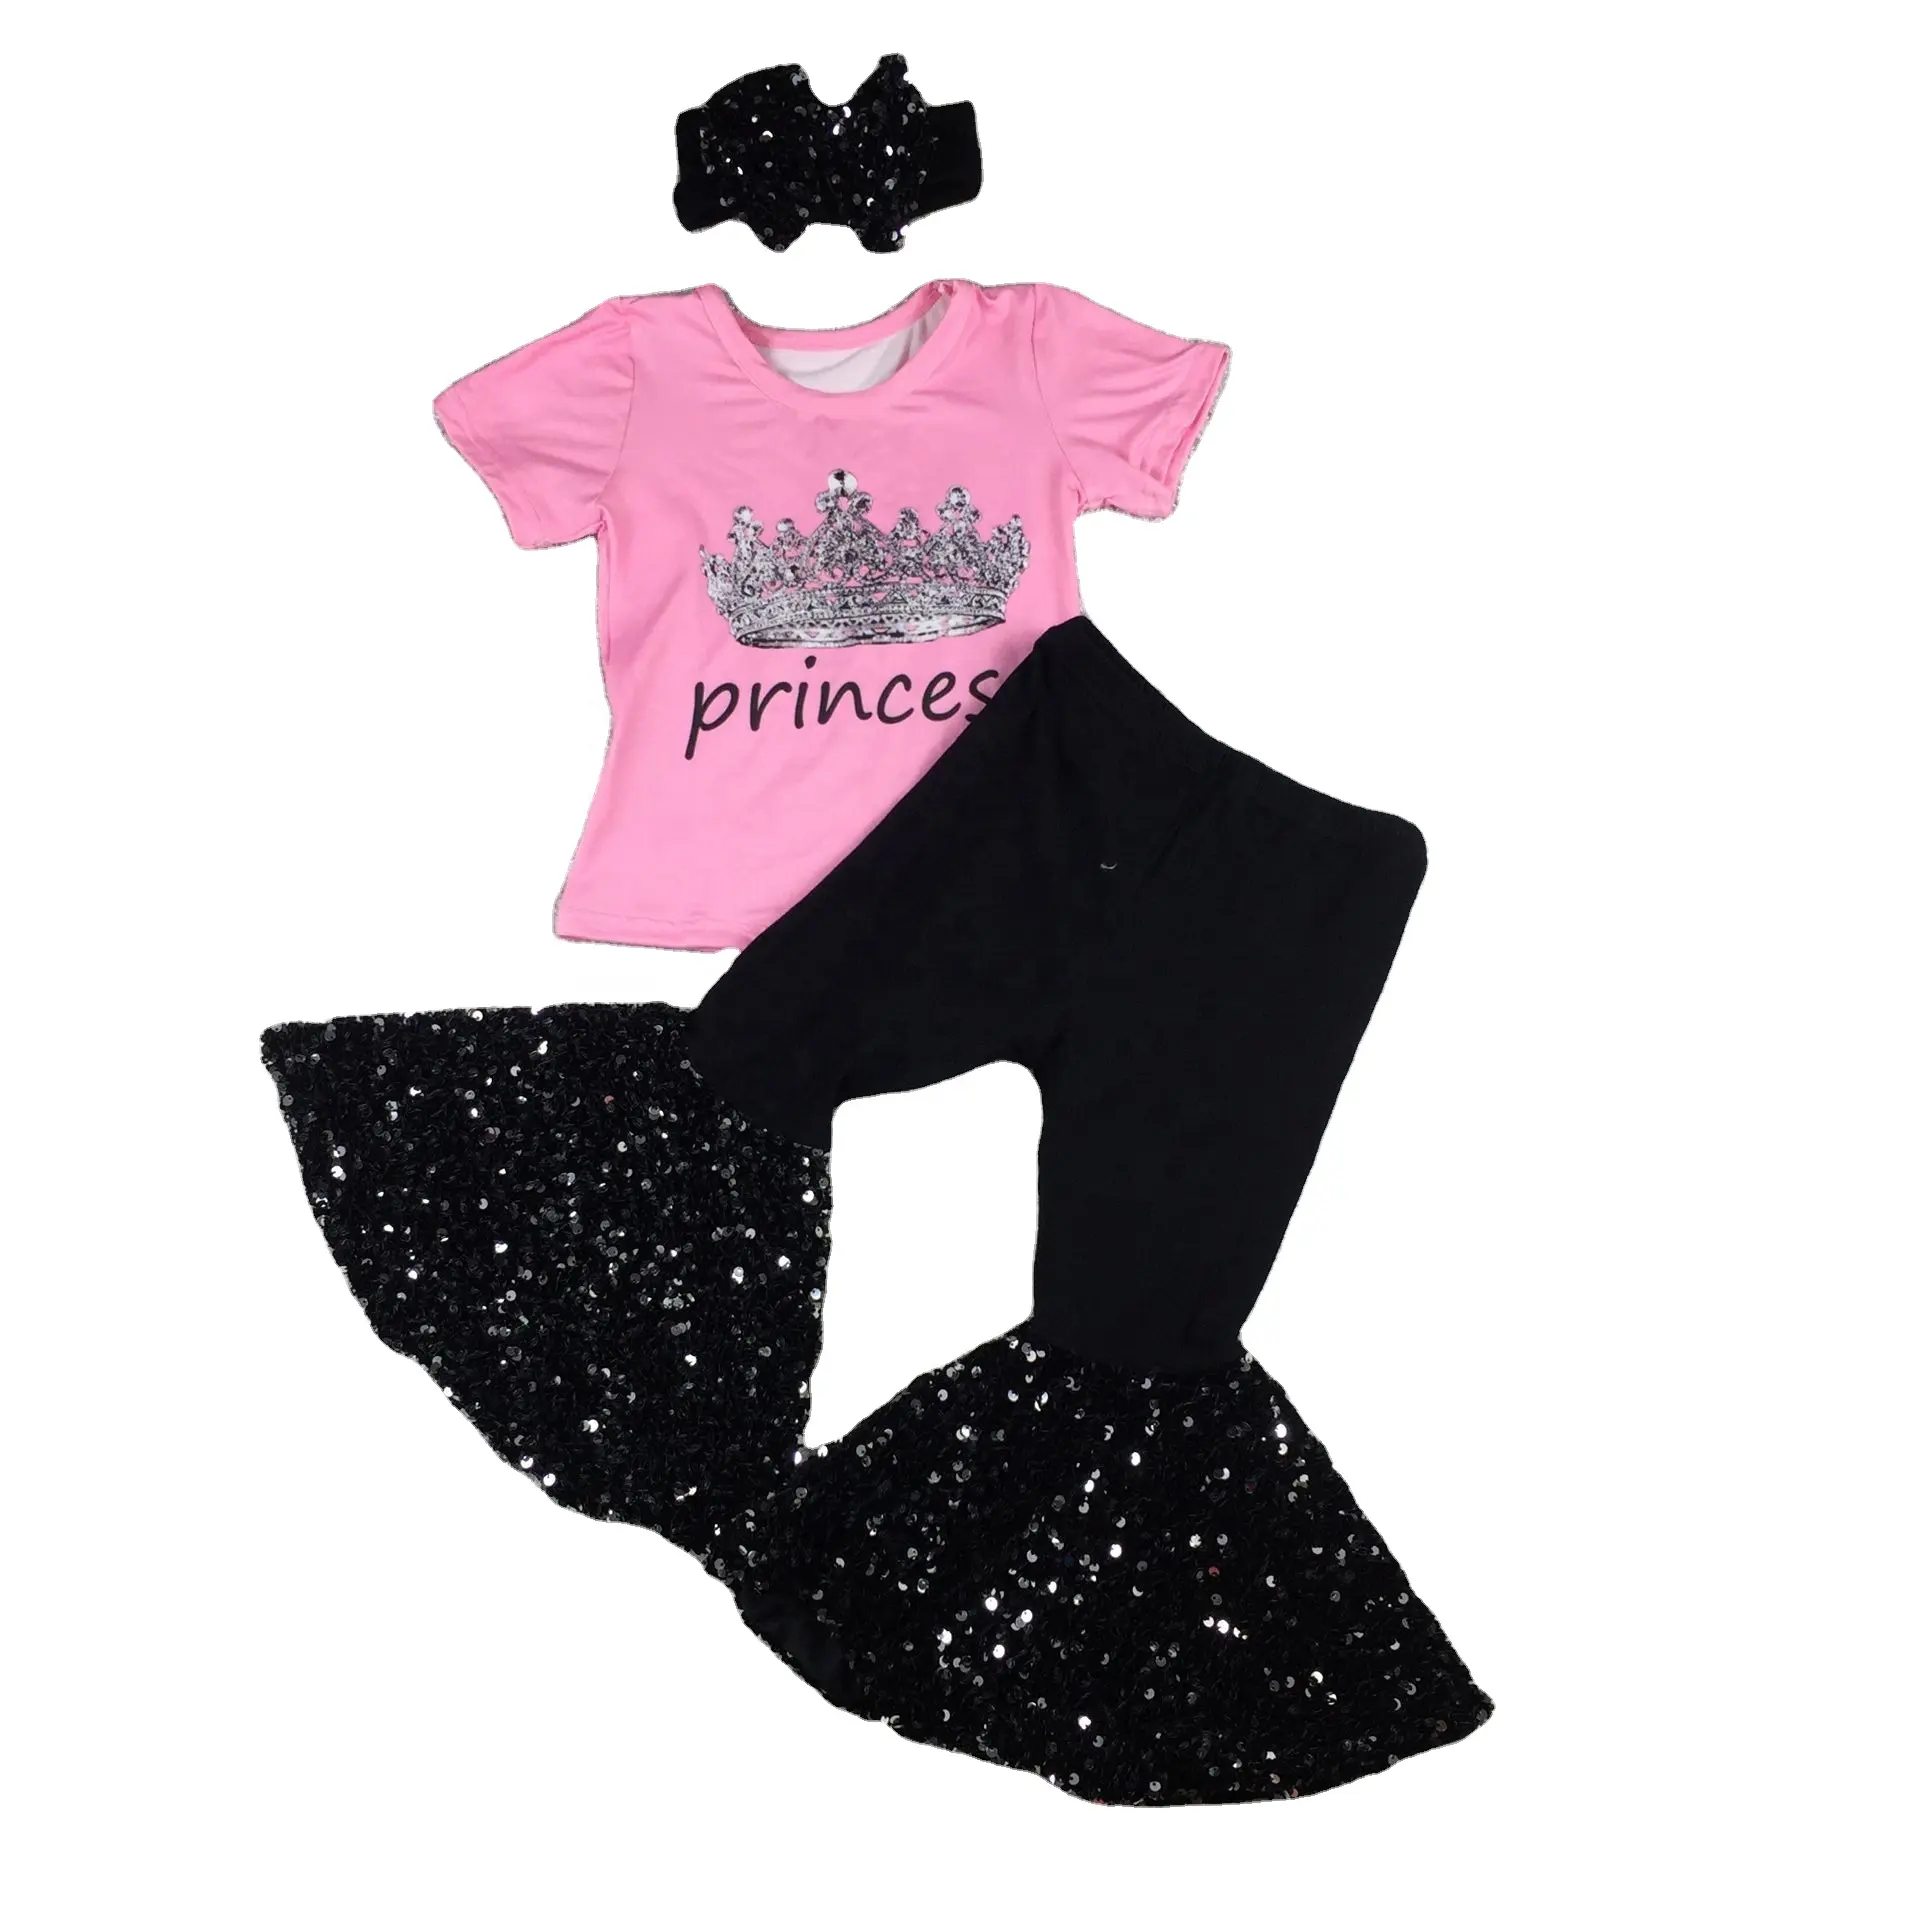 Summer princess kids clothes kids cute outfits designer baby lovely black shiny sequin bottoms sets hot sale